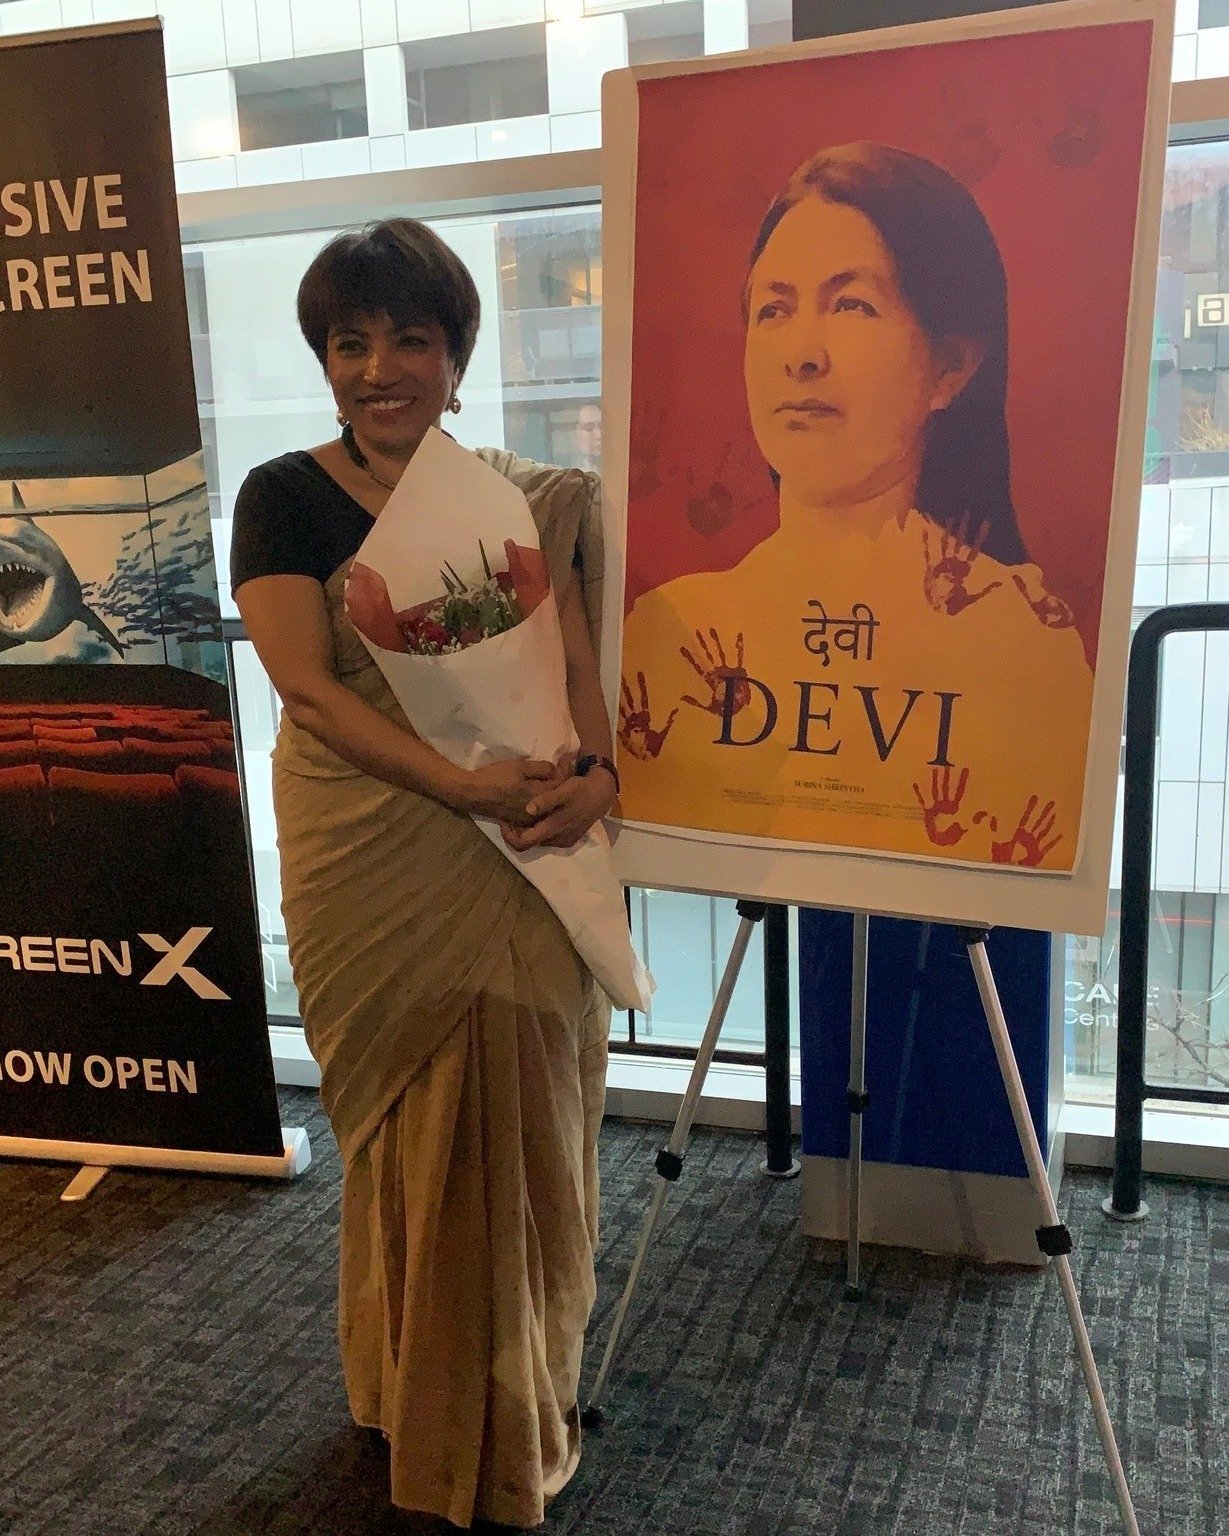 Sold Out World Premiere of 'Devi' at Hot Docs Canadian International Documentary Festival!

Director @shresthasubina1  and Cinematographer @kalpit_bishnu were thrilled by the overwhelming support at last night's world premiere of 'Devi.' 

A heartfel